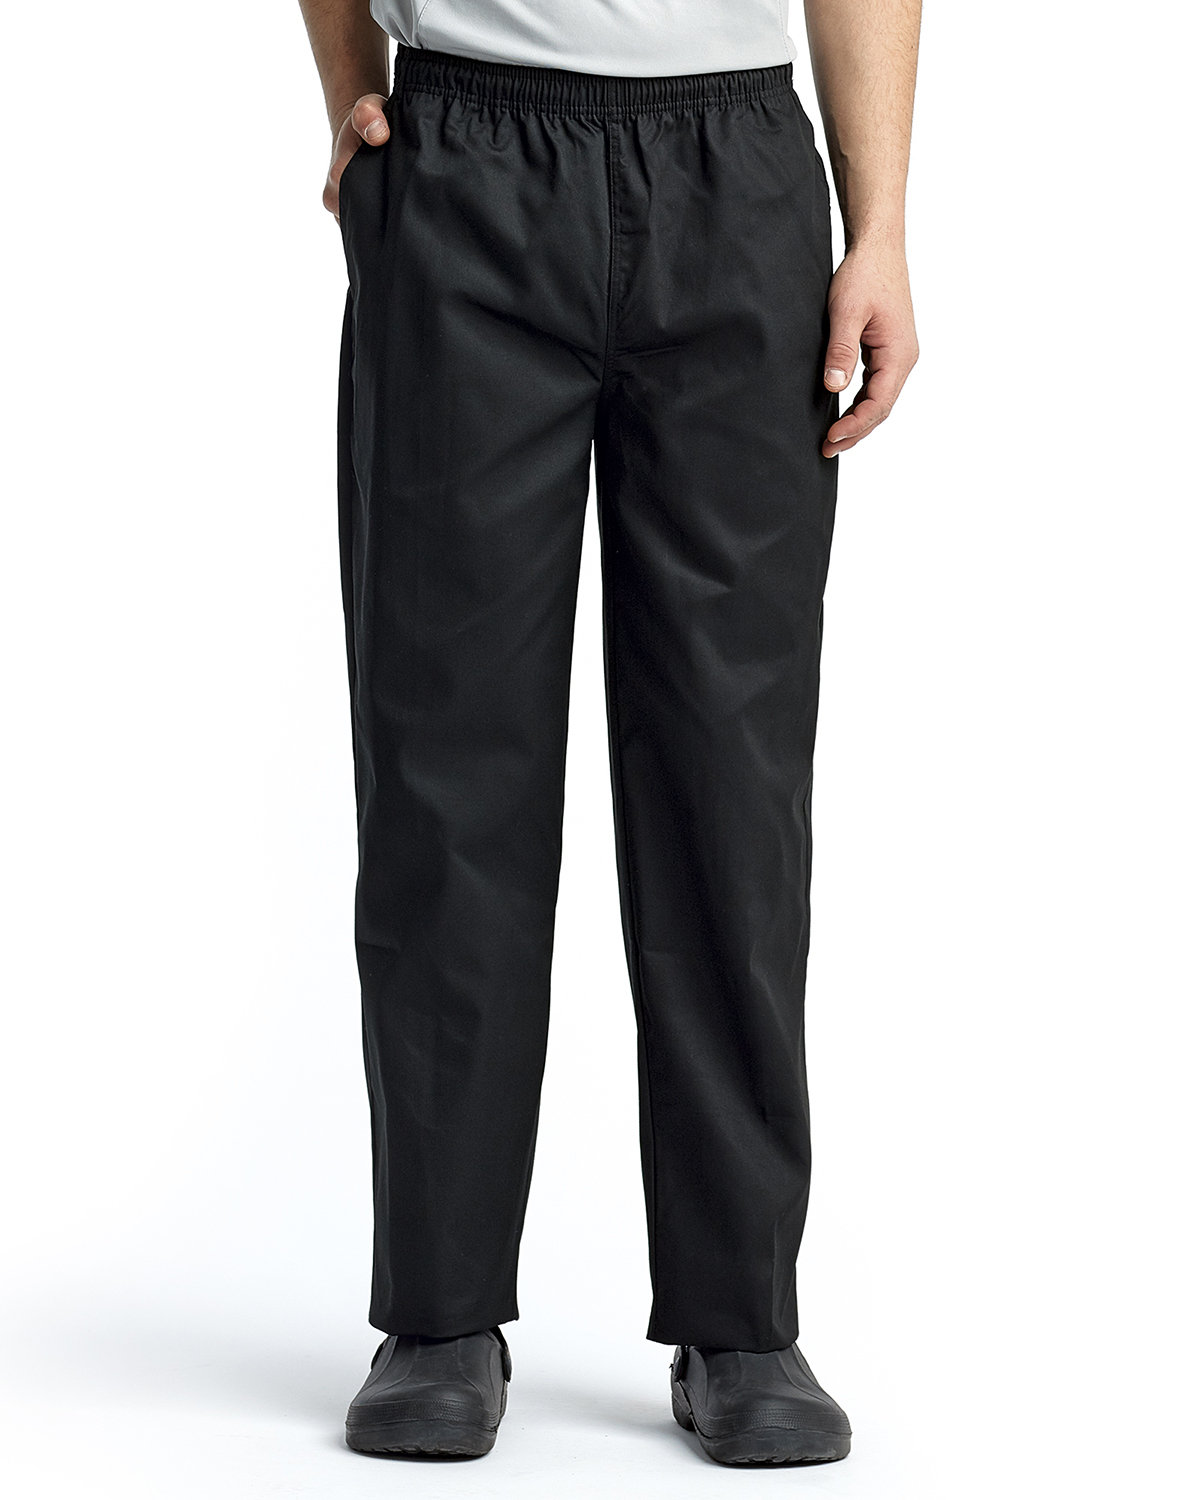 Unisex Essential Chefs Pant-Artisan Collection by Reprime